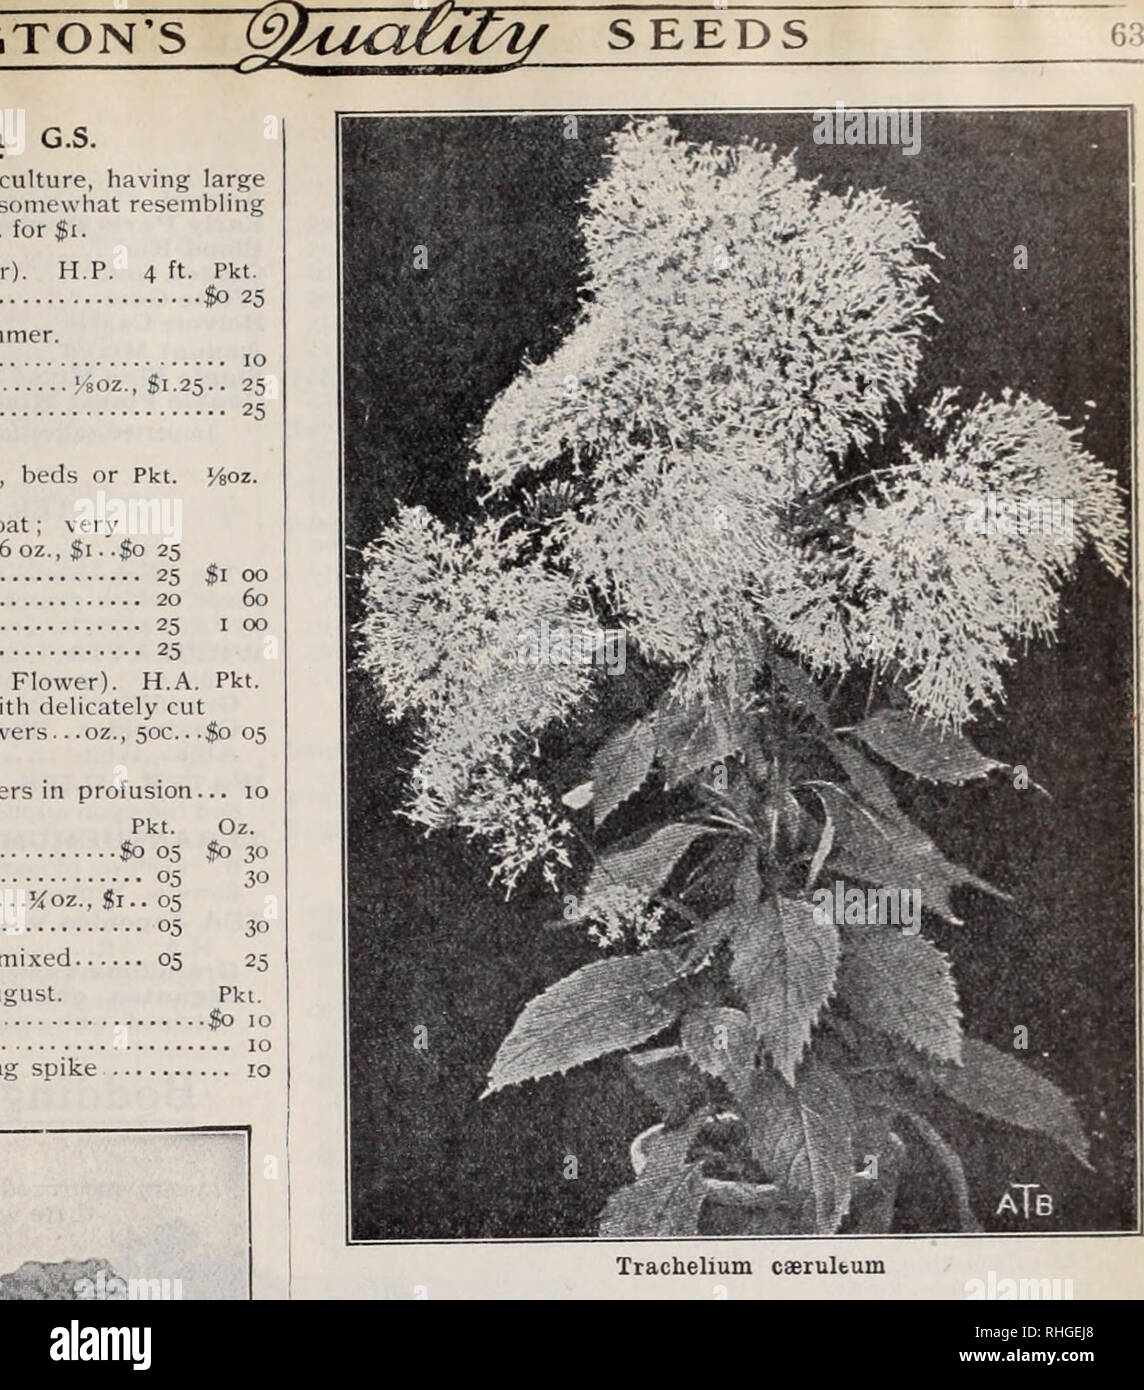 . Boddington's quality bulbs, seeds and plants / Arthur T. Boddington.. Nursery Catalogue. -Uoaaingiou s (Quality ^jiumas ^See page 64) Trachelium caerultum VERBASCUM (Mullein). H.P. Pkt. Blattaria alba giganteum. 4 ft. White. July to Sept So 50 Libani. 4 ft Yellow. July to September 10 Olympicum. 6 ft. Yellow. July to September lO- Phoeniceum. i â &lt; ft. Purple. May aud June 05 VINCA. The Annual Periwinkle from Madagascar. T.P. Useful for conservatories or bedding. Pkt. Oz. Alba. White So 10 Si 00 Rosea. Rose 10 i 00 &quot; alba. Rose ,Tn&lt;l white 10 i 00 Mixed 10 75 VIRGINIA STOCKS. H.A. Stock Photo